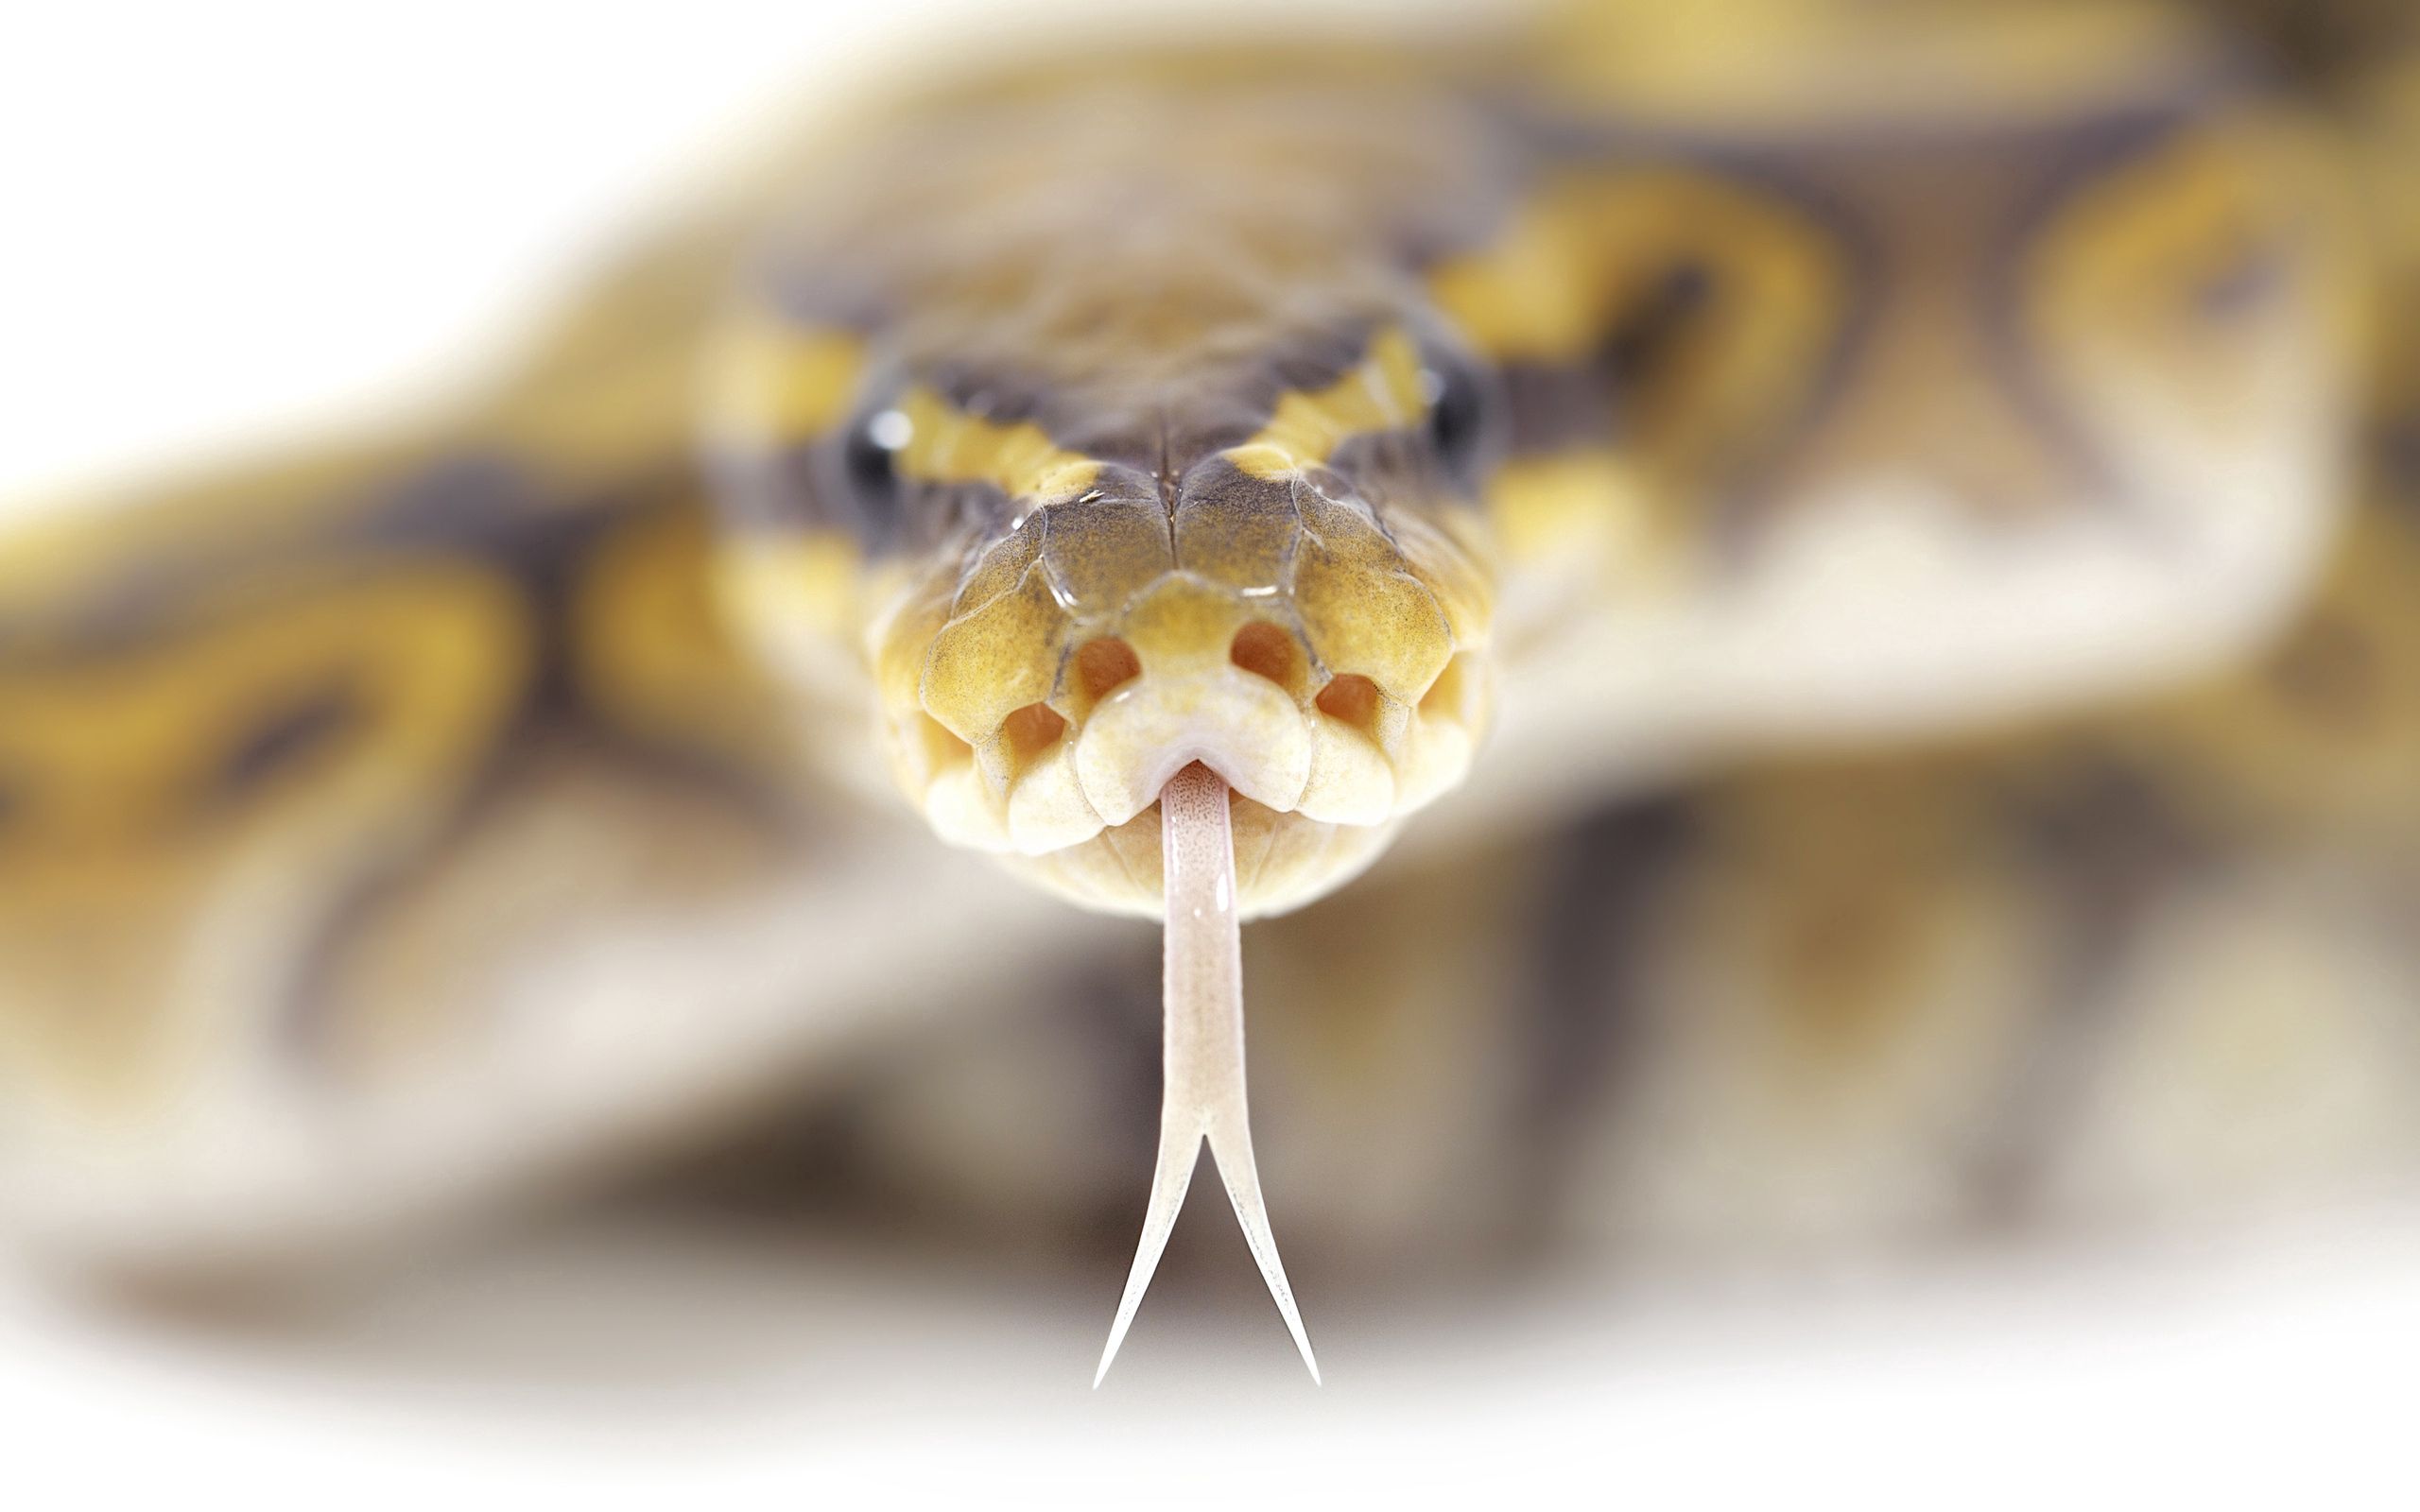 snake, animals, stains, spots, language, tongue, poison UHD